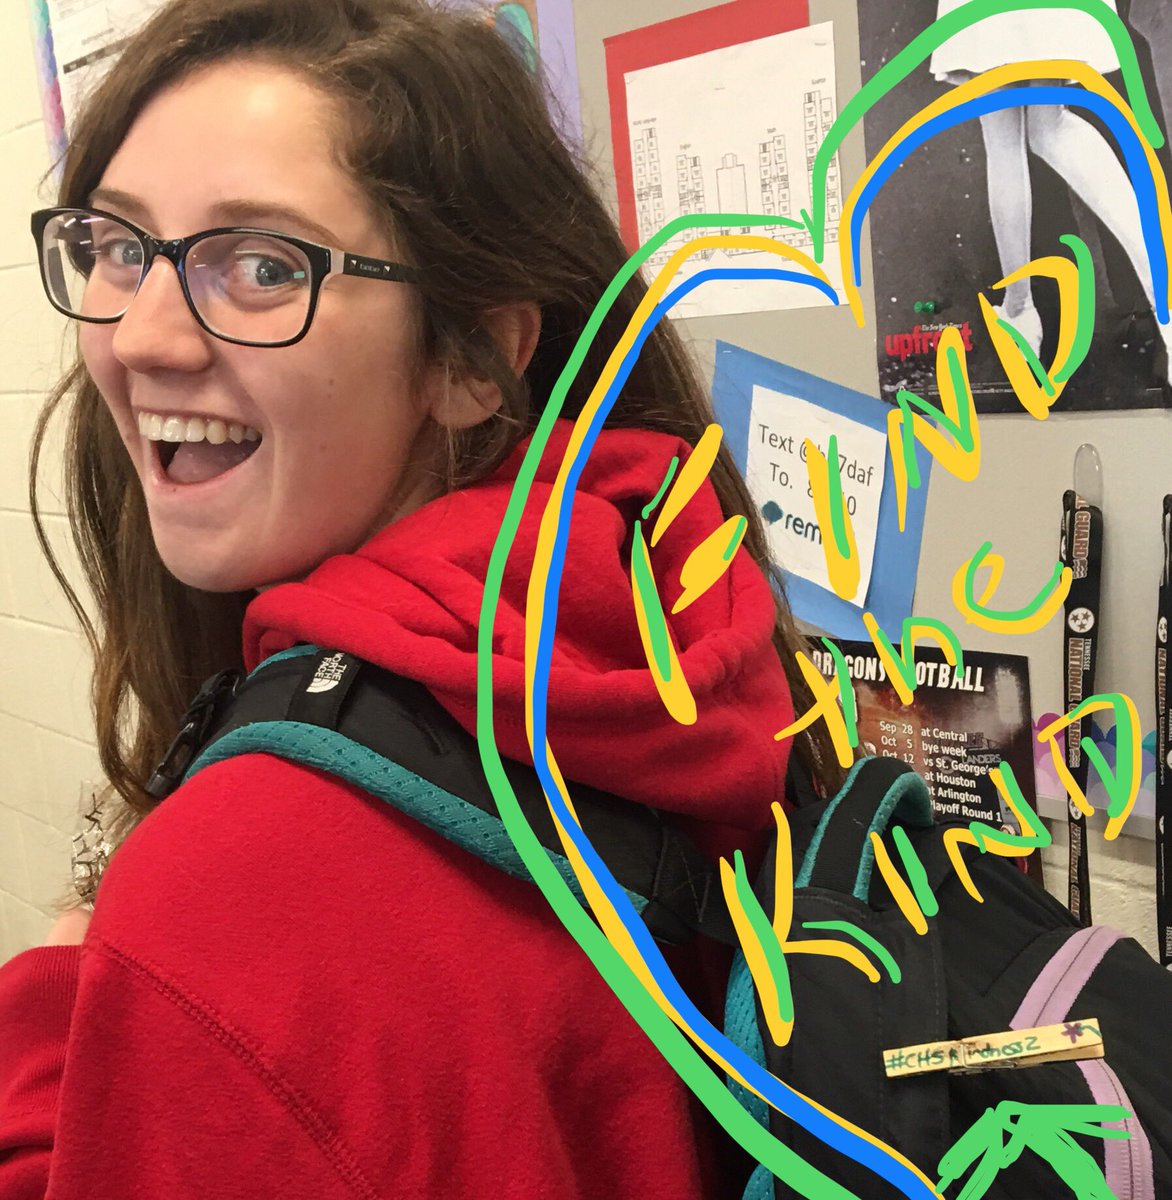 Caught this girl being kind today!! She got “pinned for it”.  Being sunshine for others!   #firewithinchs #clothespinkindness     #findthekind